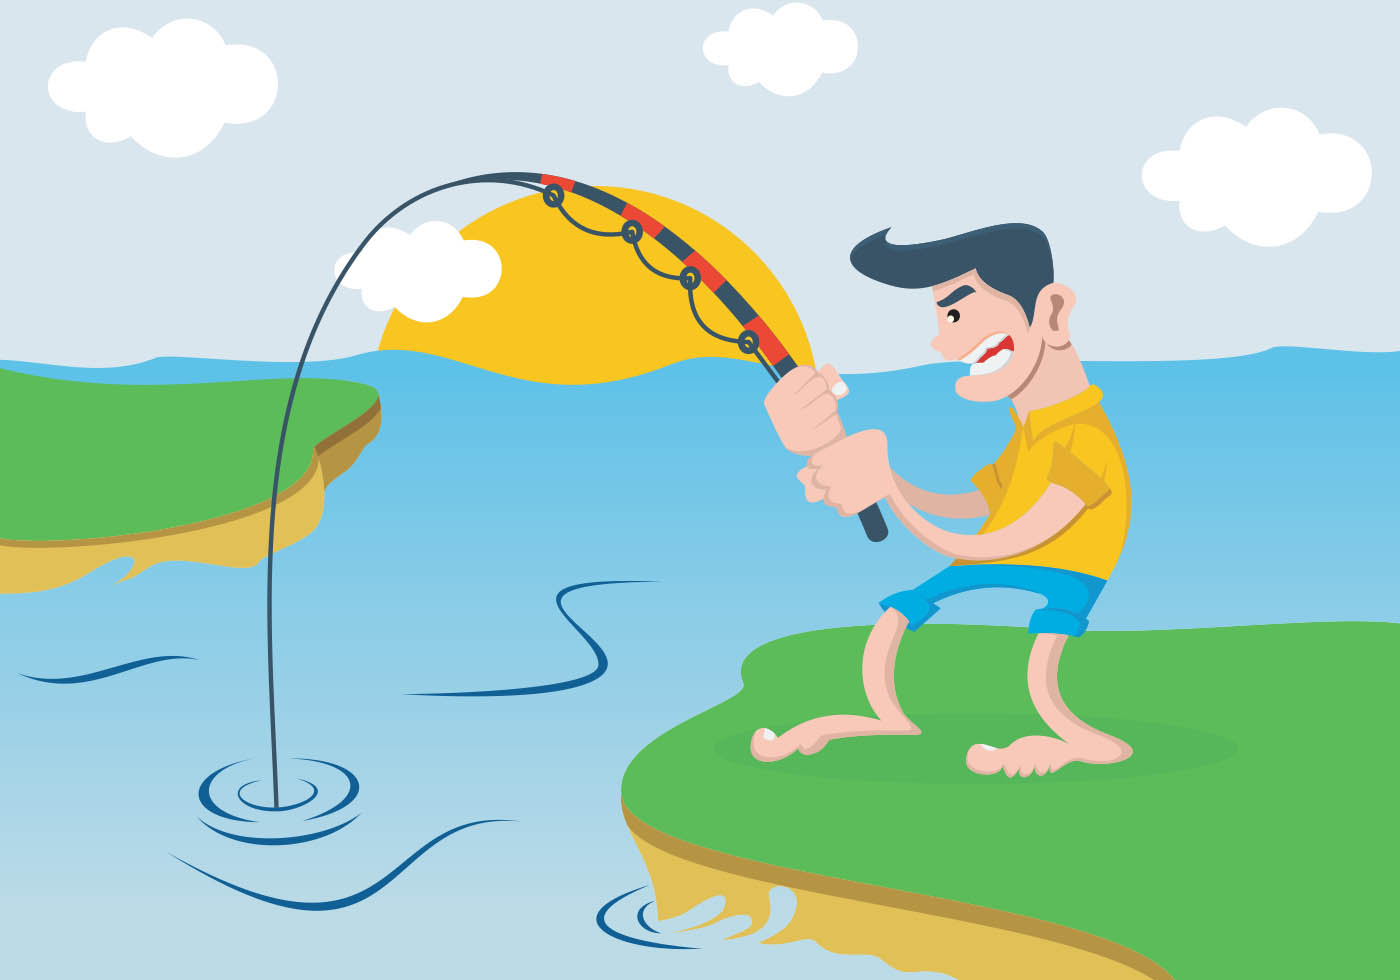 Download A Man Fishing In The River 128309 - Download Free Vectors ...